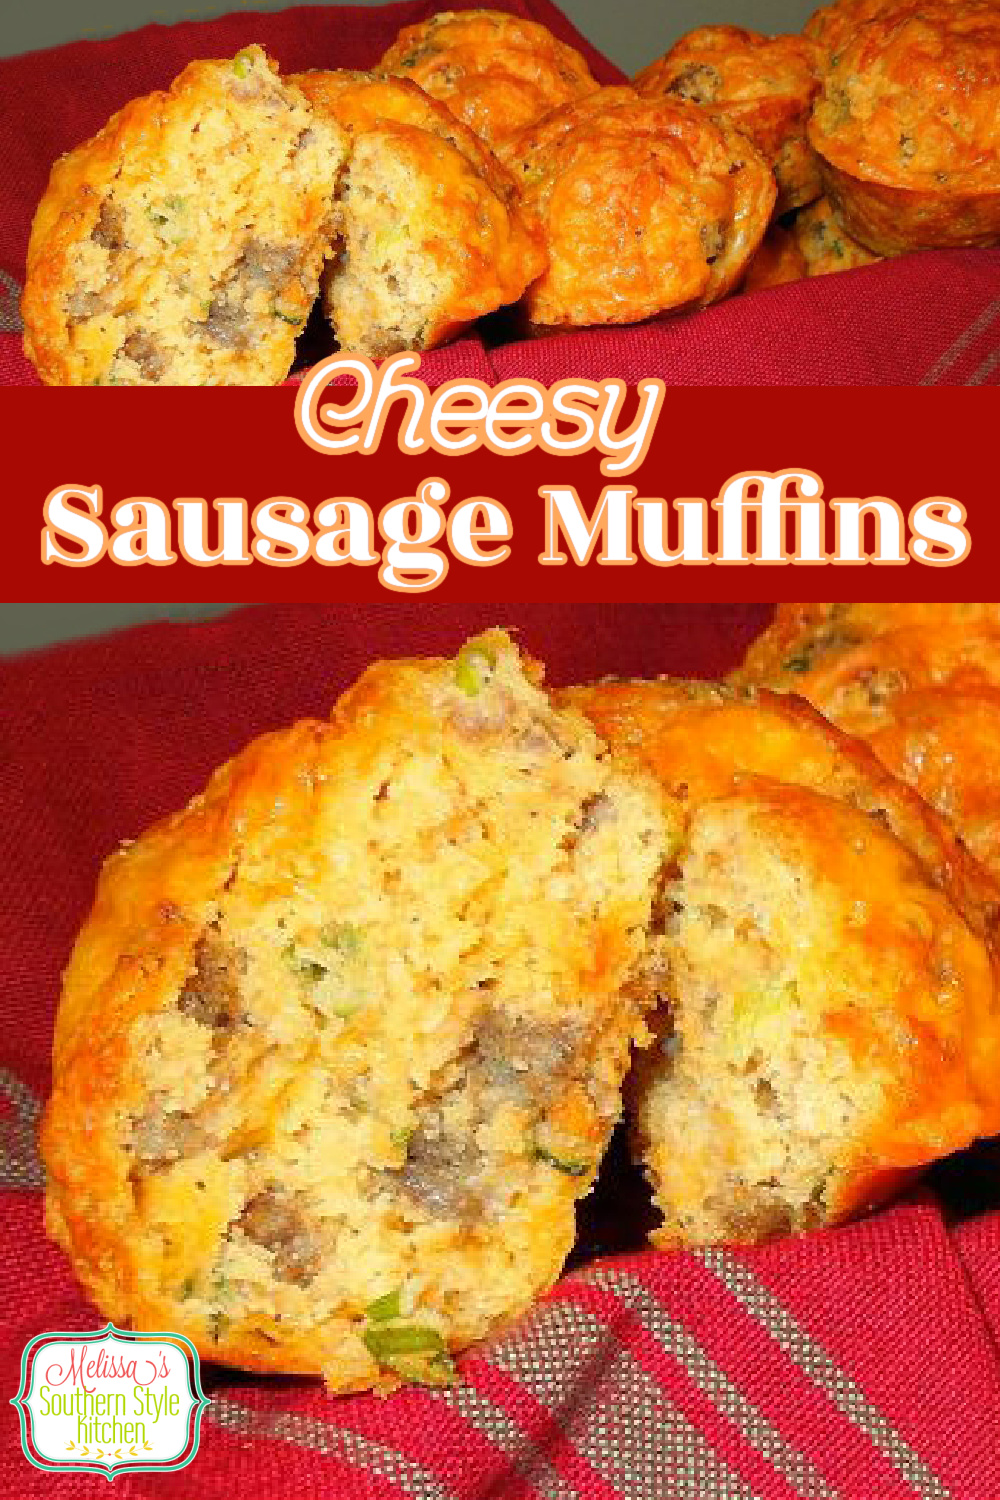 These kicked up Sausage Muffins are guaranteed to kick start your day #sausagemuffins #cheesemuffins #sausageandscheddarmuffins #brunch #muffinrecipes #breakfast #southernrecipes #easymuffinsrecipe